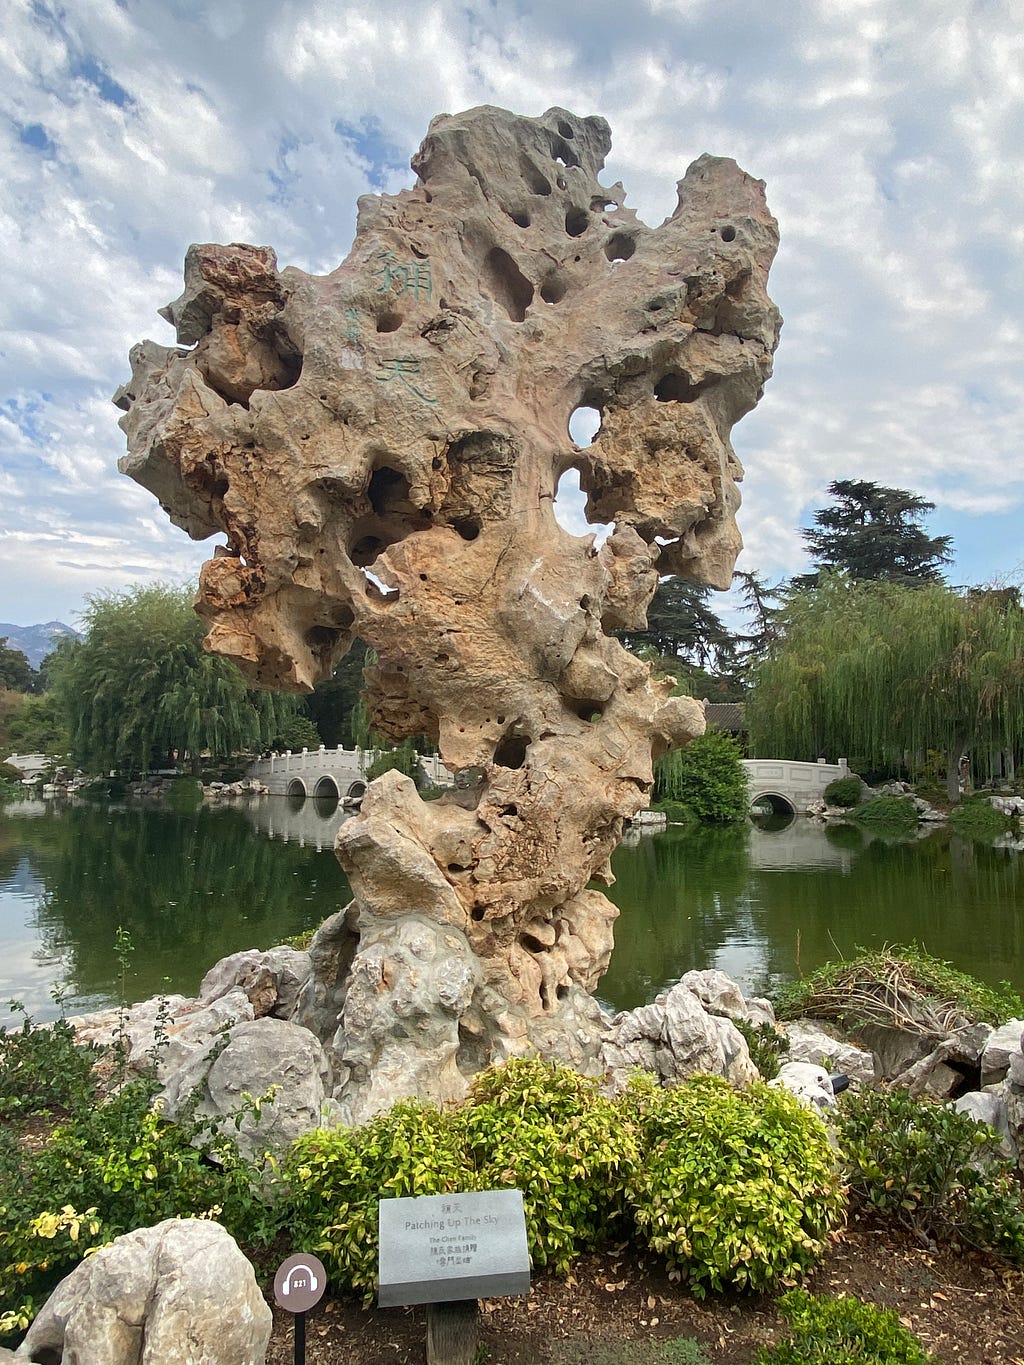 This monumental Taihu rock is called “Patching up the Sky.” (KimberlyUs)